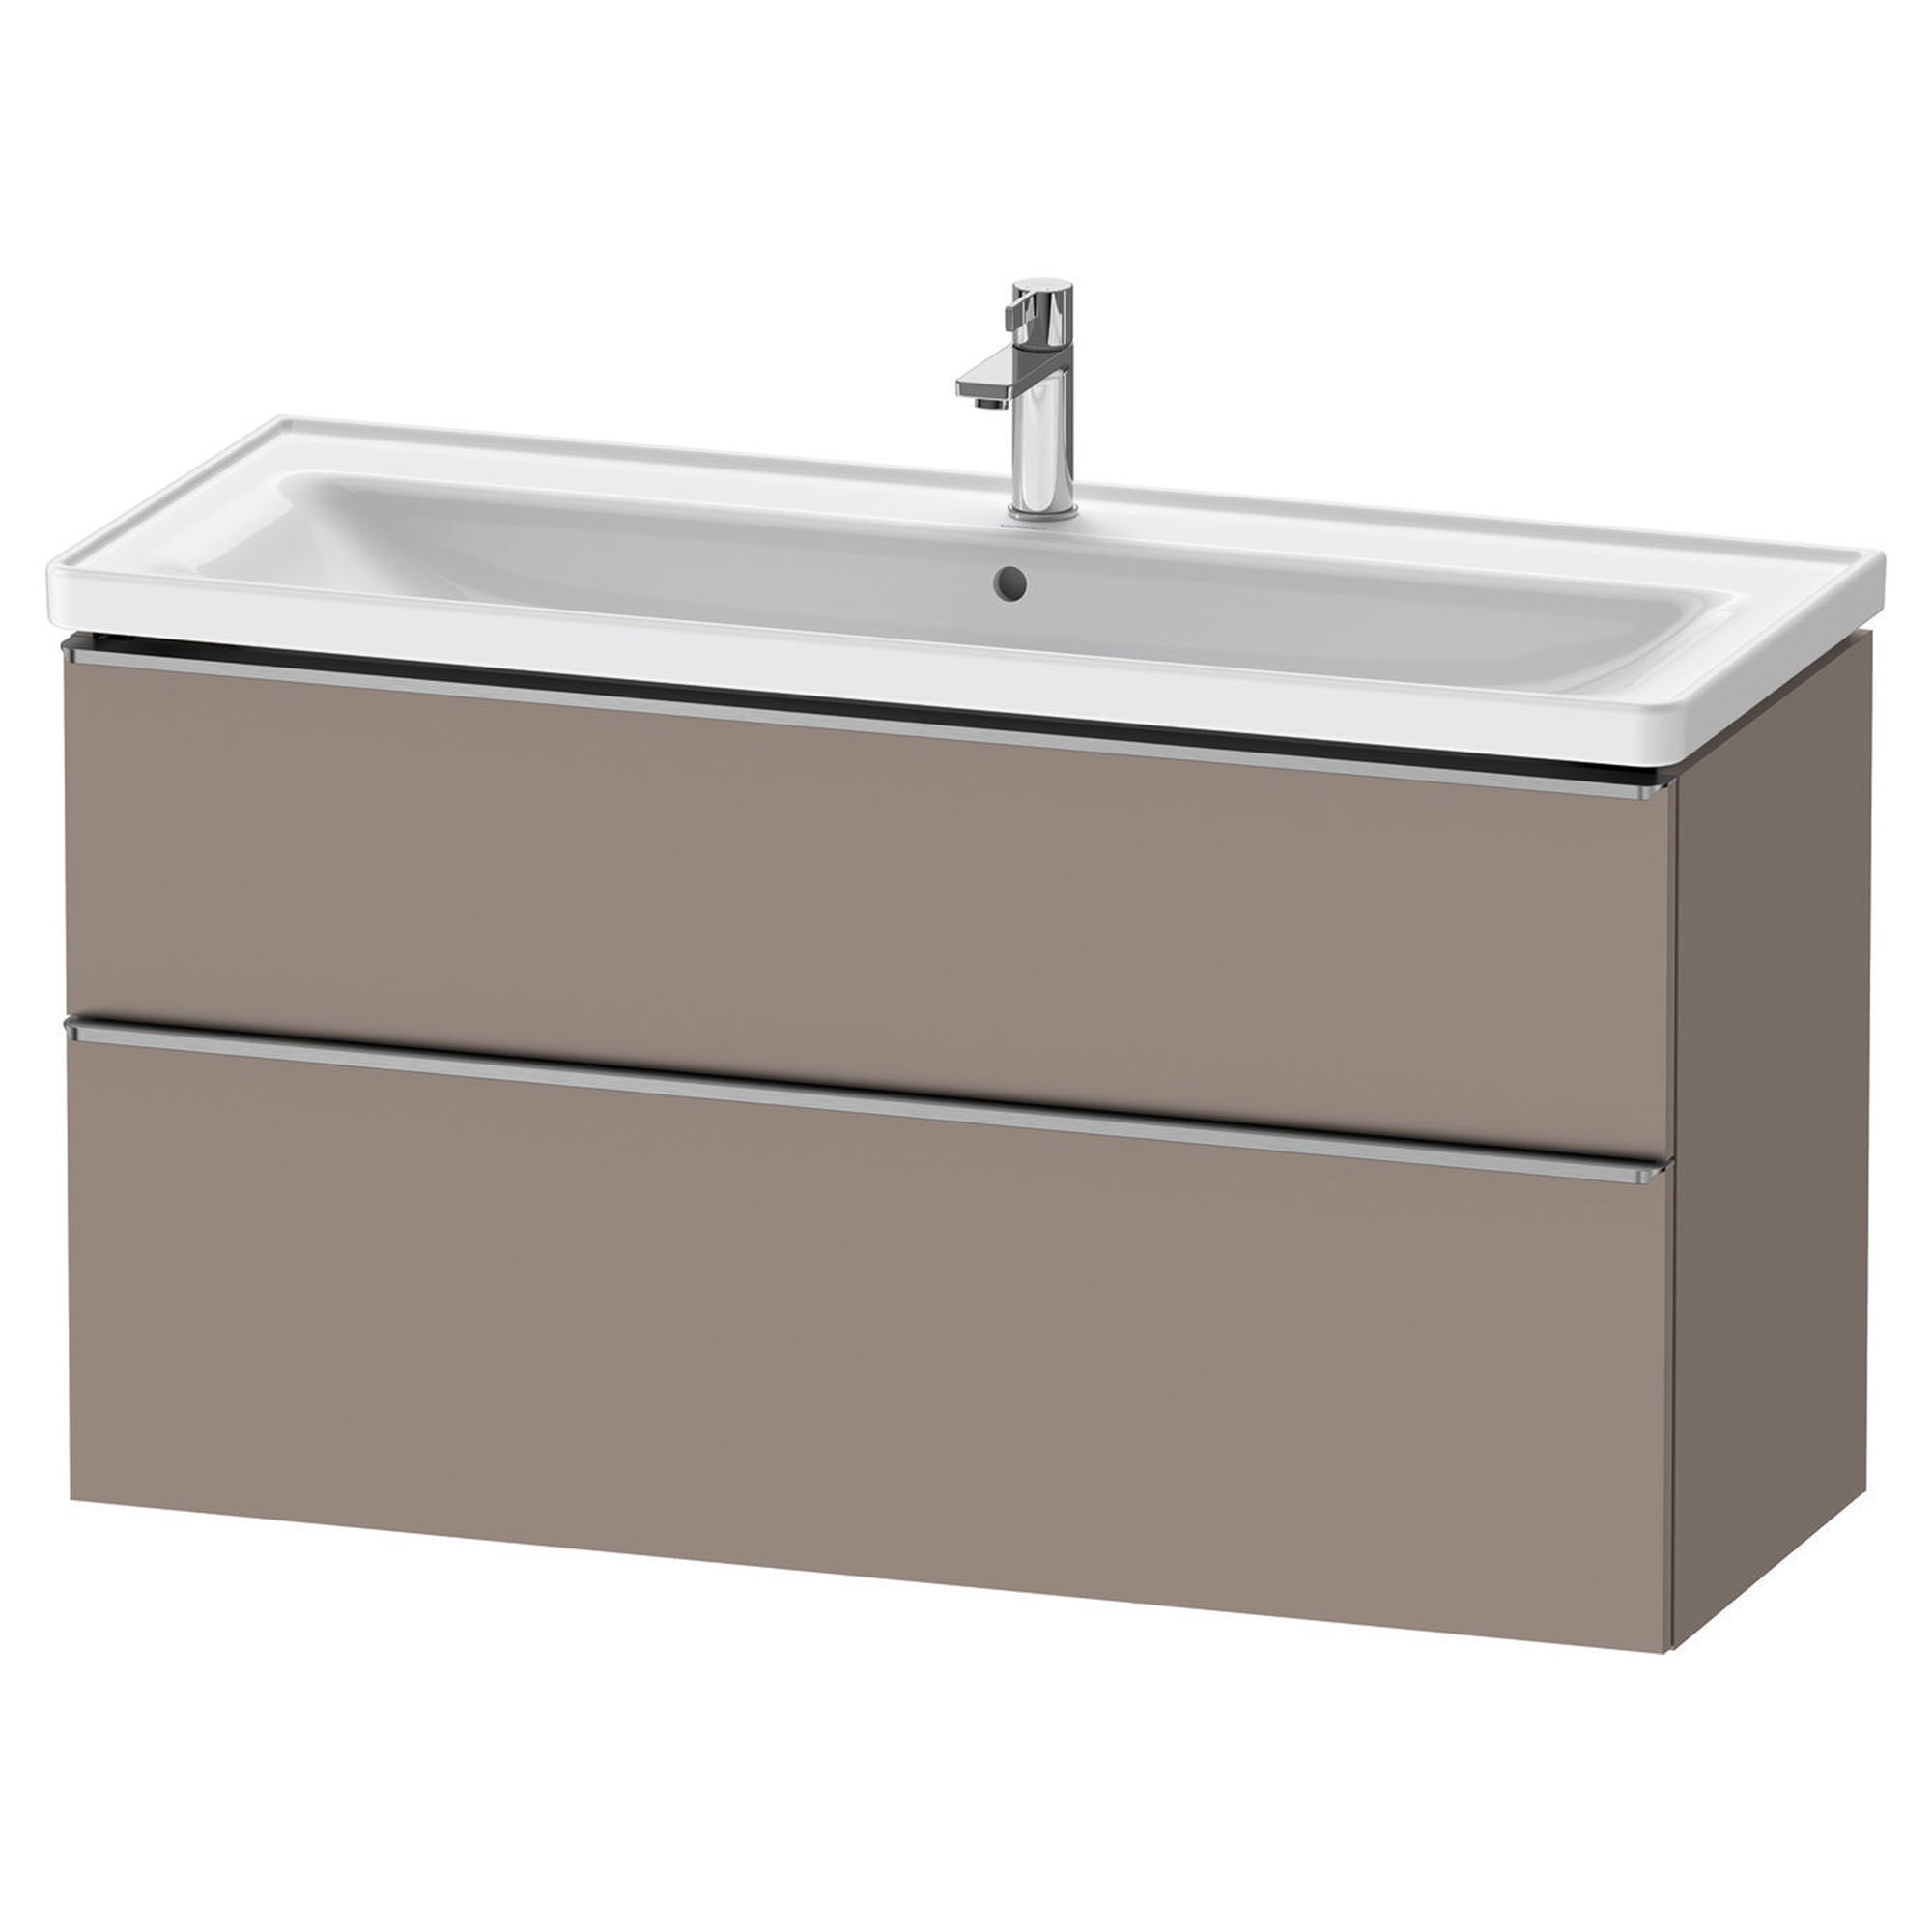 duravit d-neo 1200mm wall mounted vanity unit with d-neo basin basalt stainless steel handles